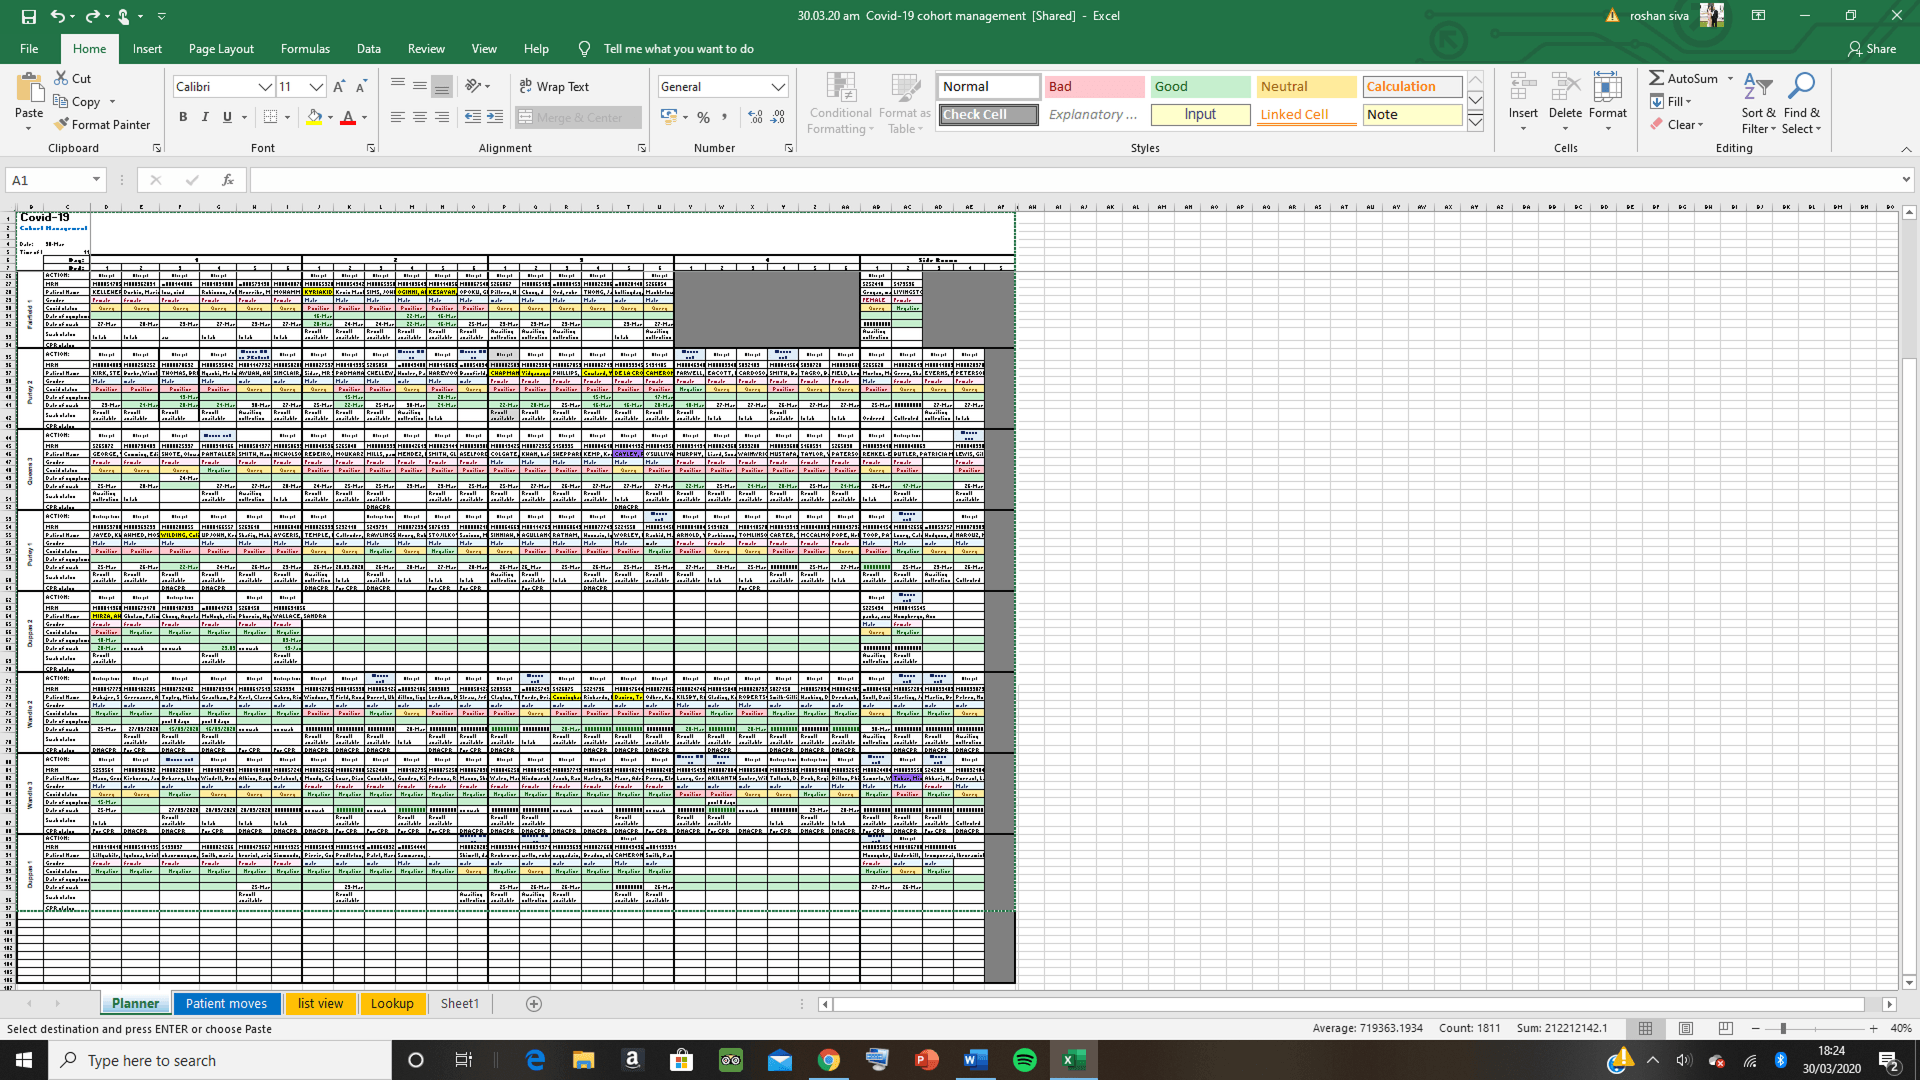 Excel database / electronic copy of the “Rosh board”